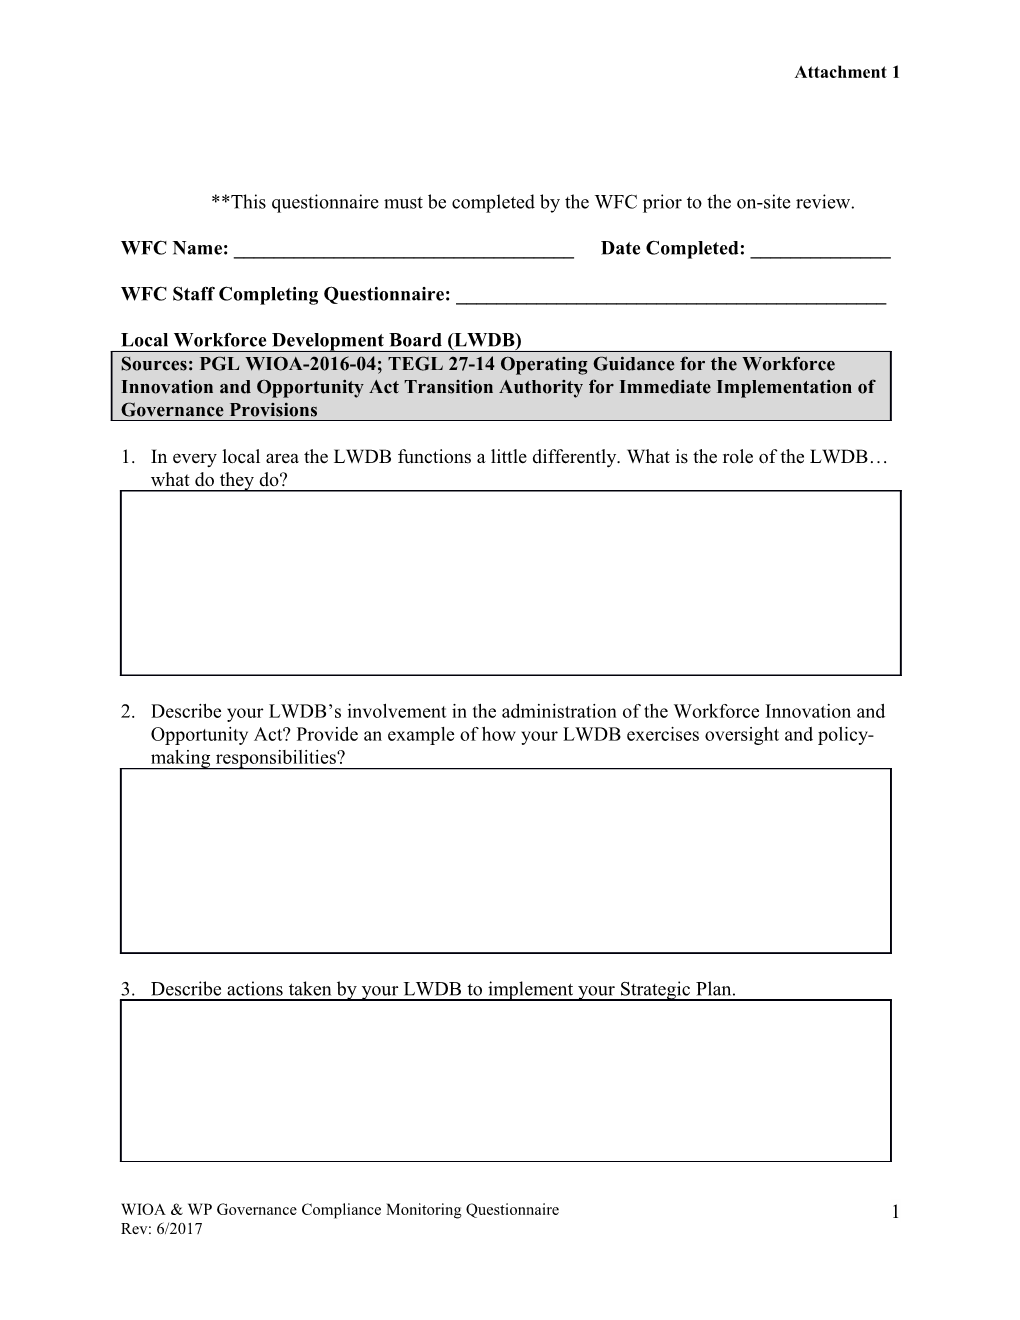 This Questionnaire Must Be Completed by the WFC Prior to the On-Site Review